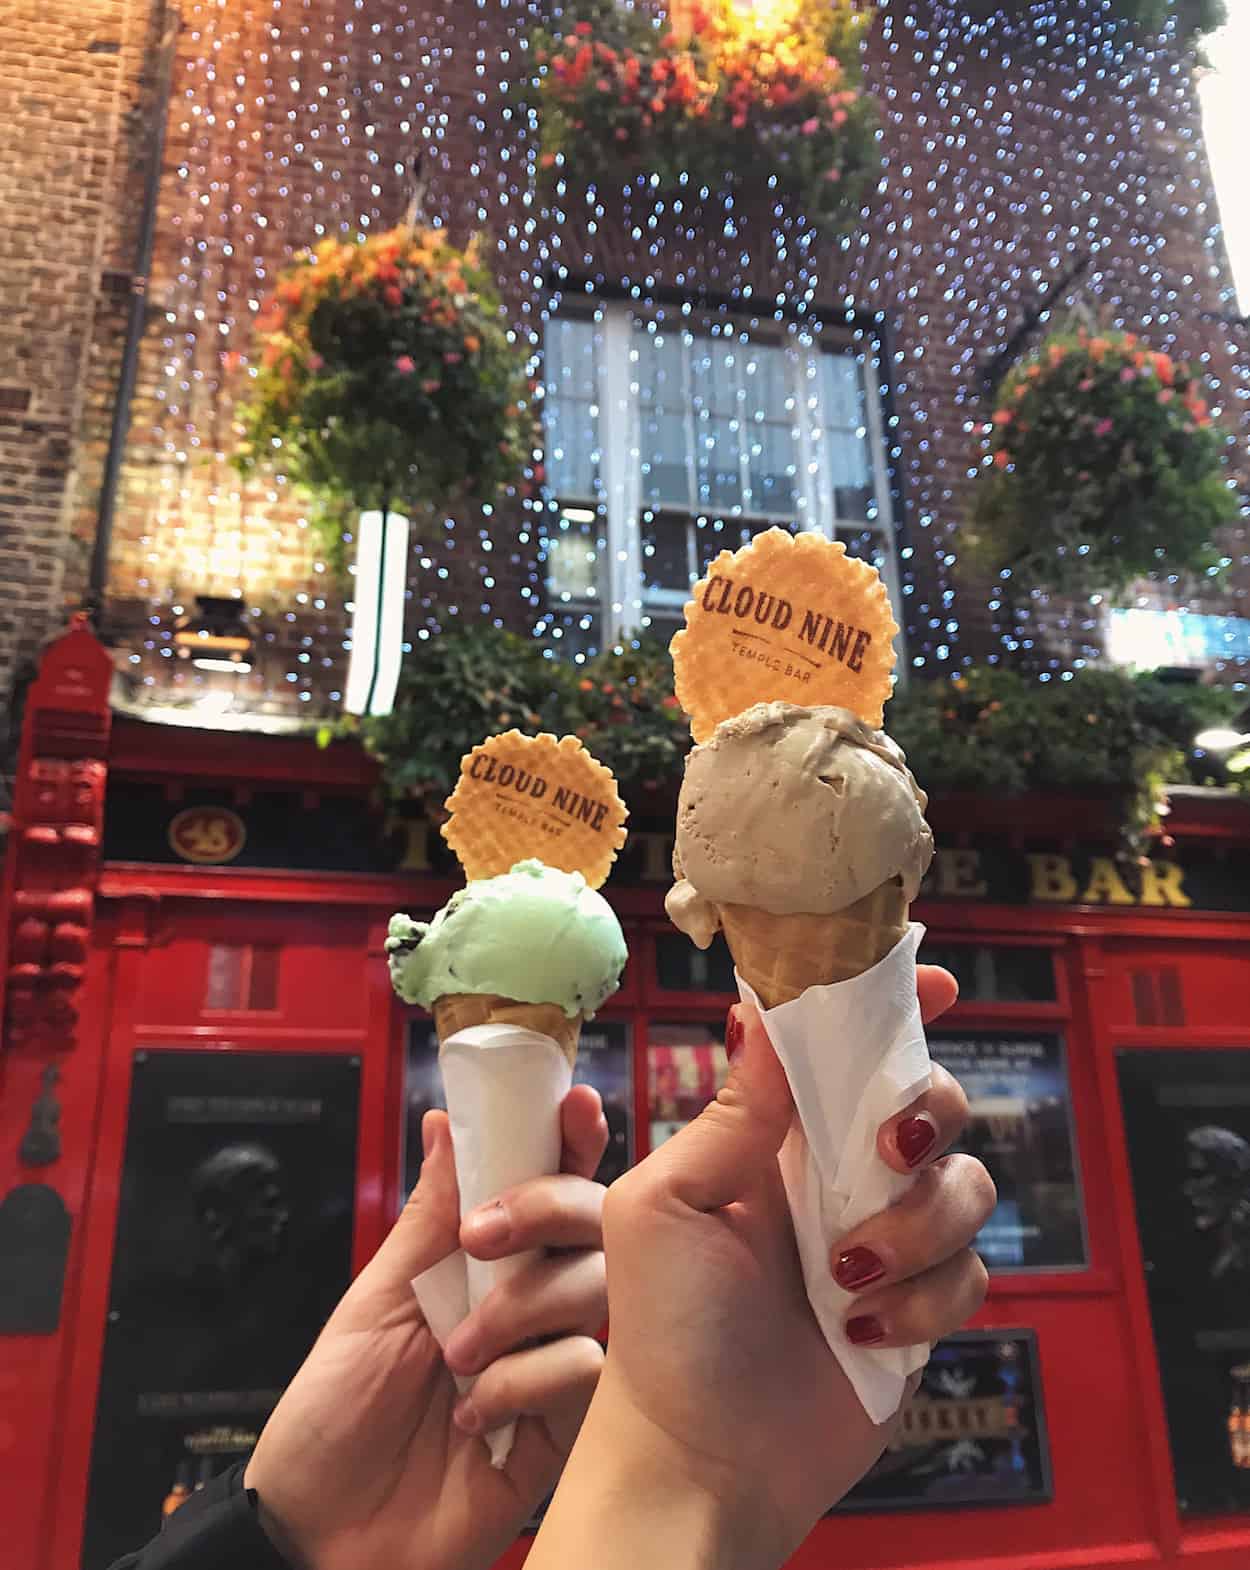 Best ice cream spots in Ireland | top places to get gelato in Dublin, Galway, Dingle | where to eat ice cream in Ireland | Diary of a Toronto Girl